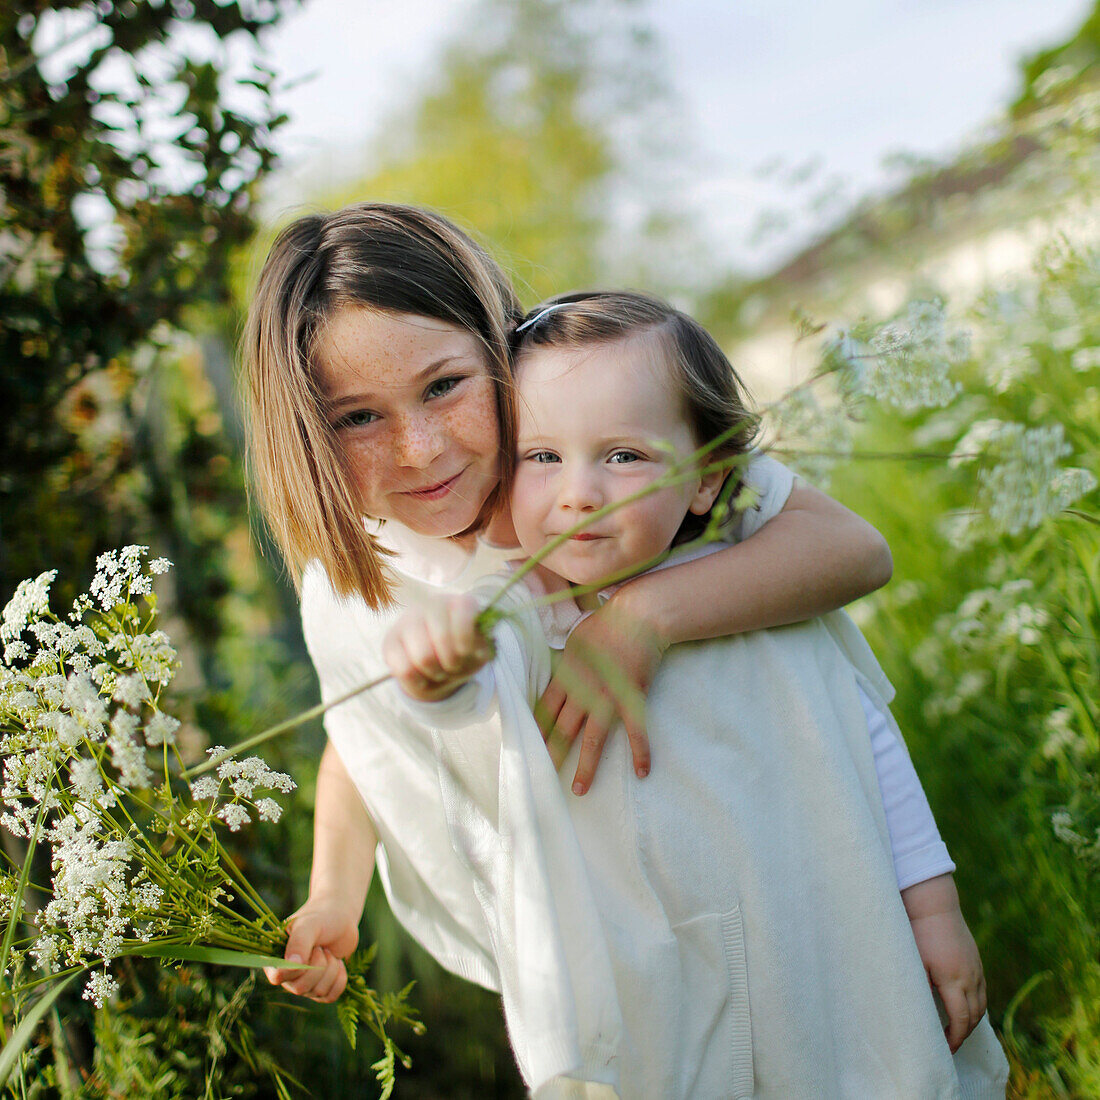 2 young girls in the country holding white flowers